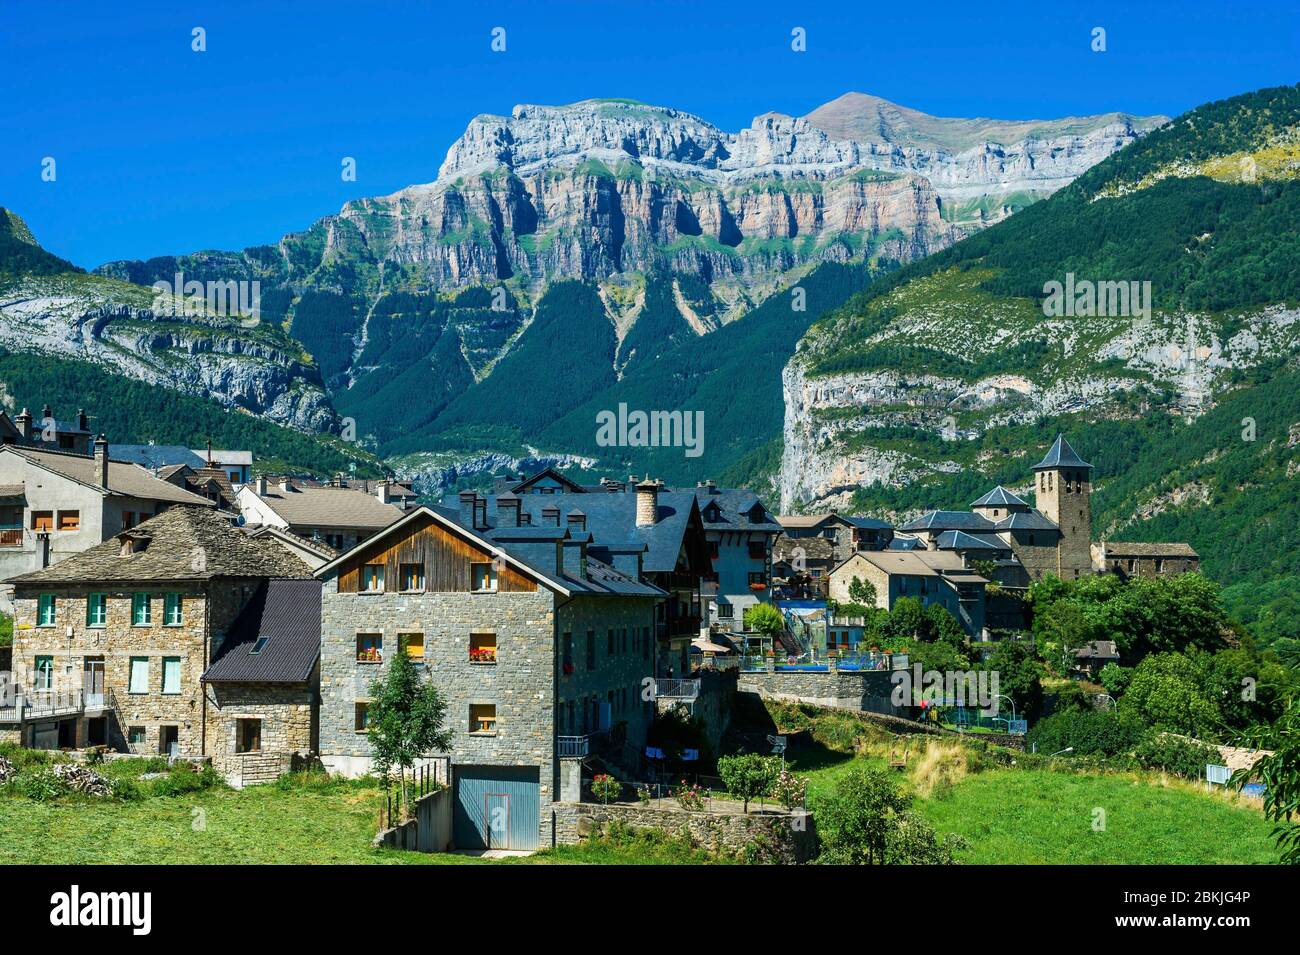 Spain, Aragon, comarque of Sobrarbe, province of Huesca, National Park of Ordesa and Monte Perdido, listed as World Heritage by UNESCO, Torla village Stock Photo